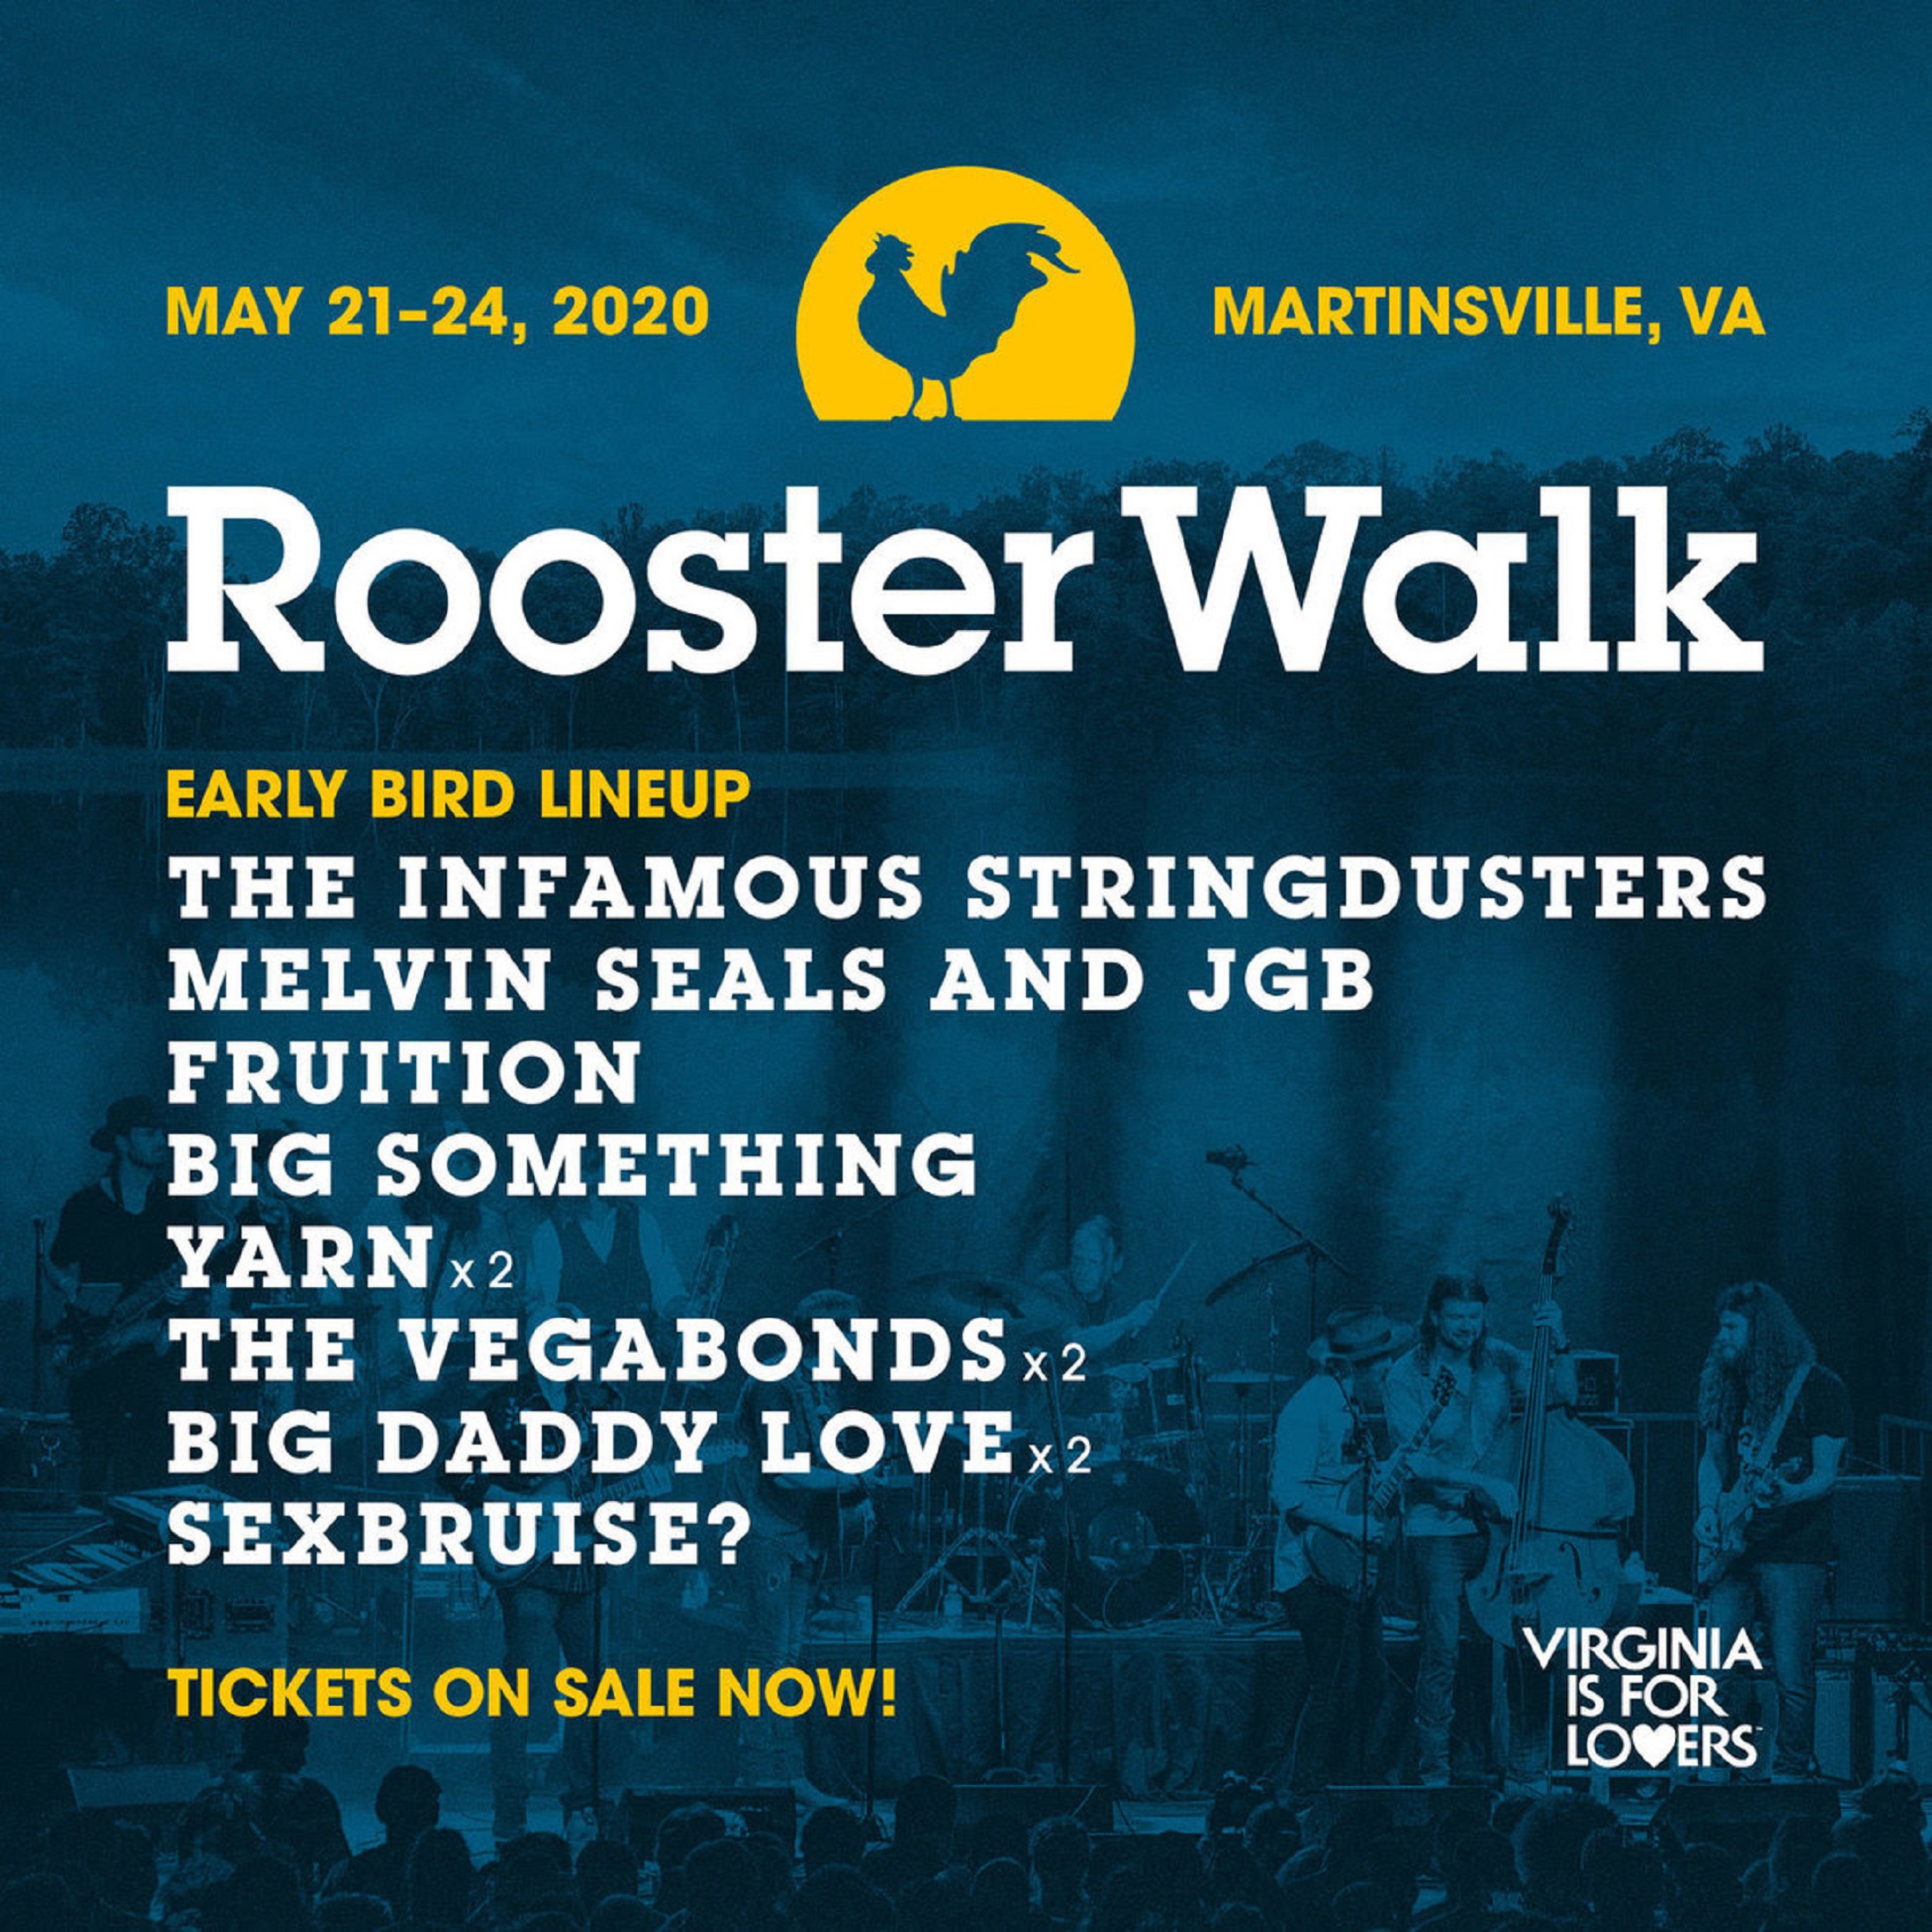 Infamous Stringdusters + Melvin Seals + Fruition top early Rooster Walk lineup